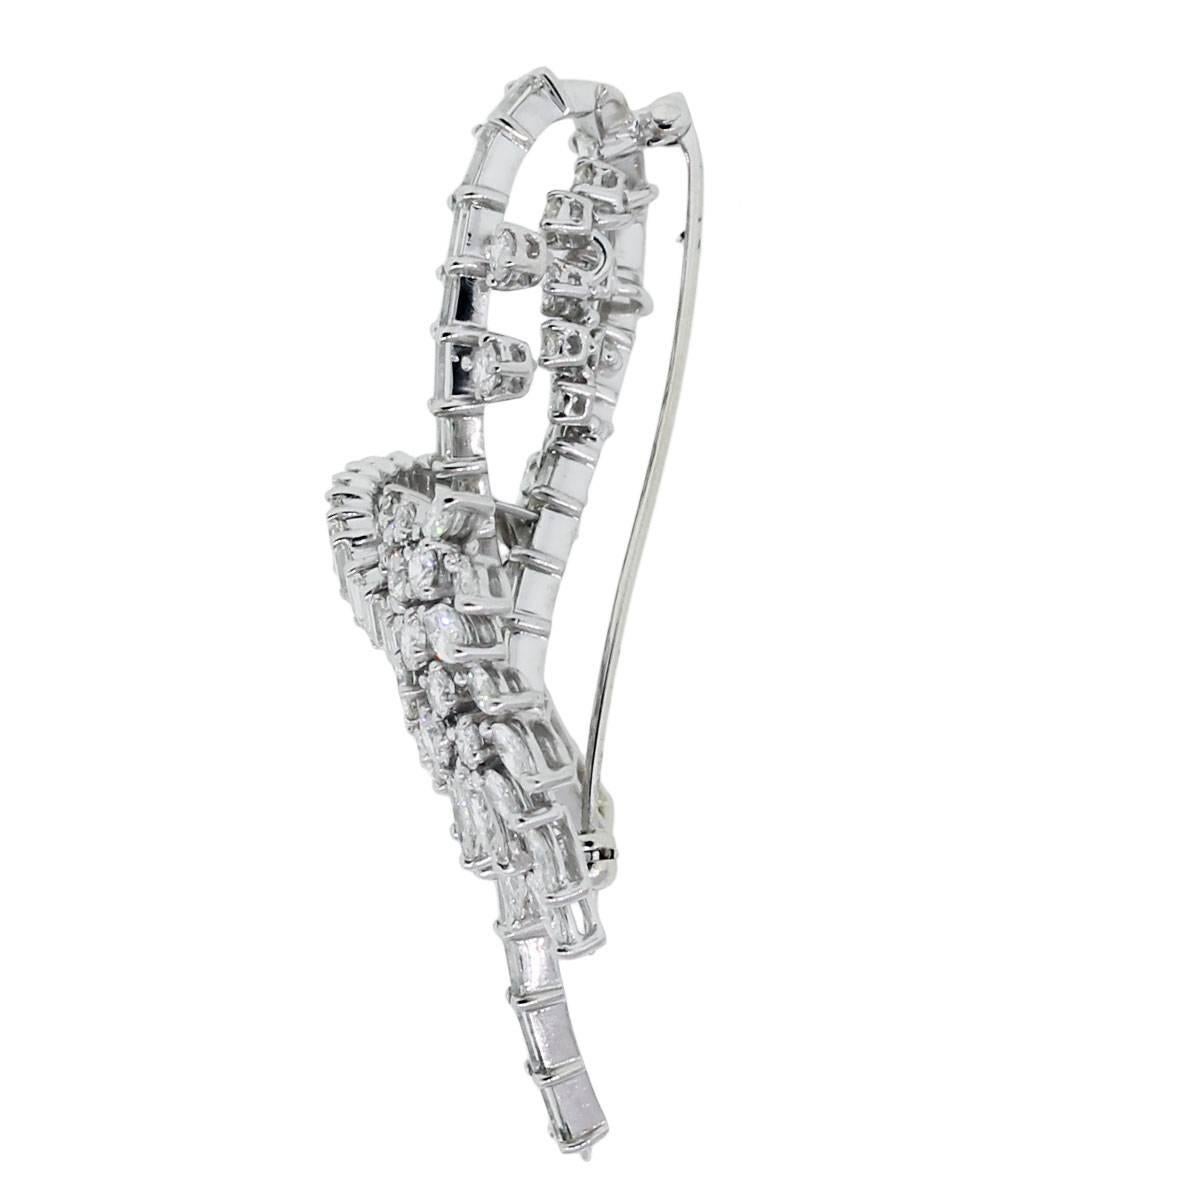 Style: Platinum 6ctw Diamond Vintage Brooch Pin
Material: Platinum
Diamond Details: Approximately 6ctw of of Baguette, Round Brilliant and Marquise Diamonds. Diamonds are F/G in color and VS in clarity.
Clasp: Pin stem & secure closure
Pin